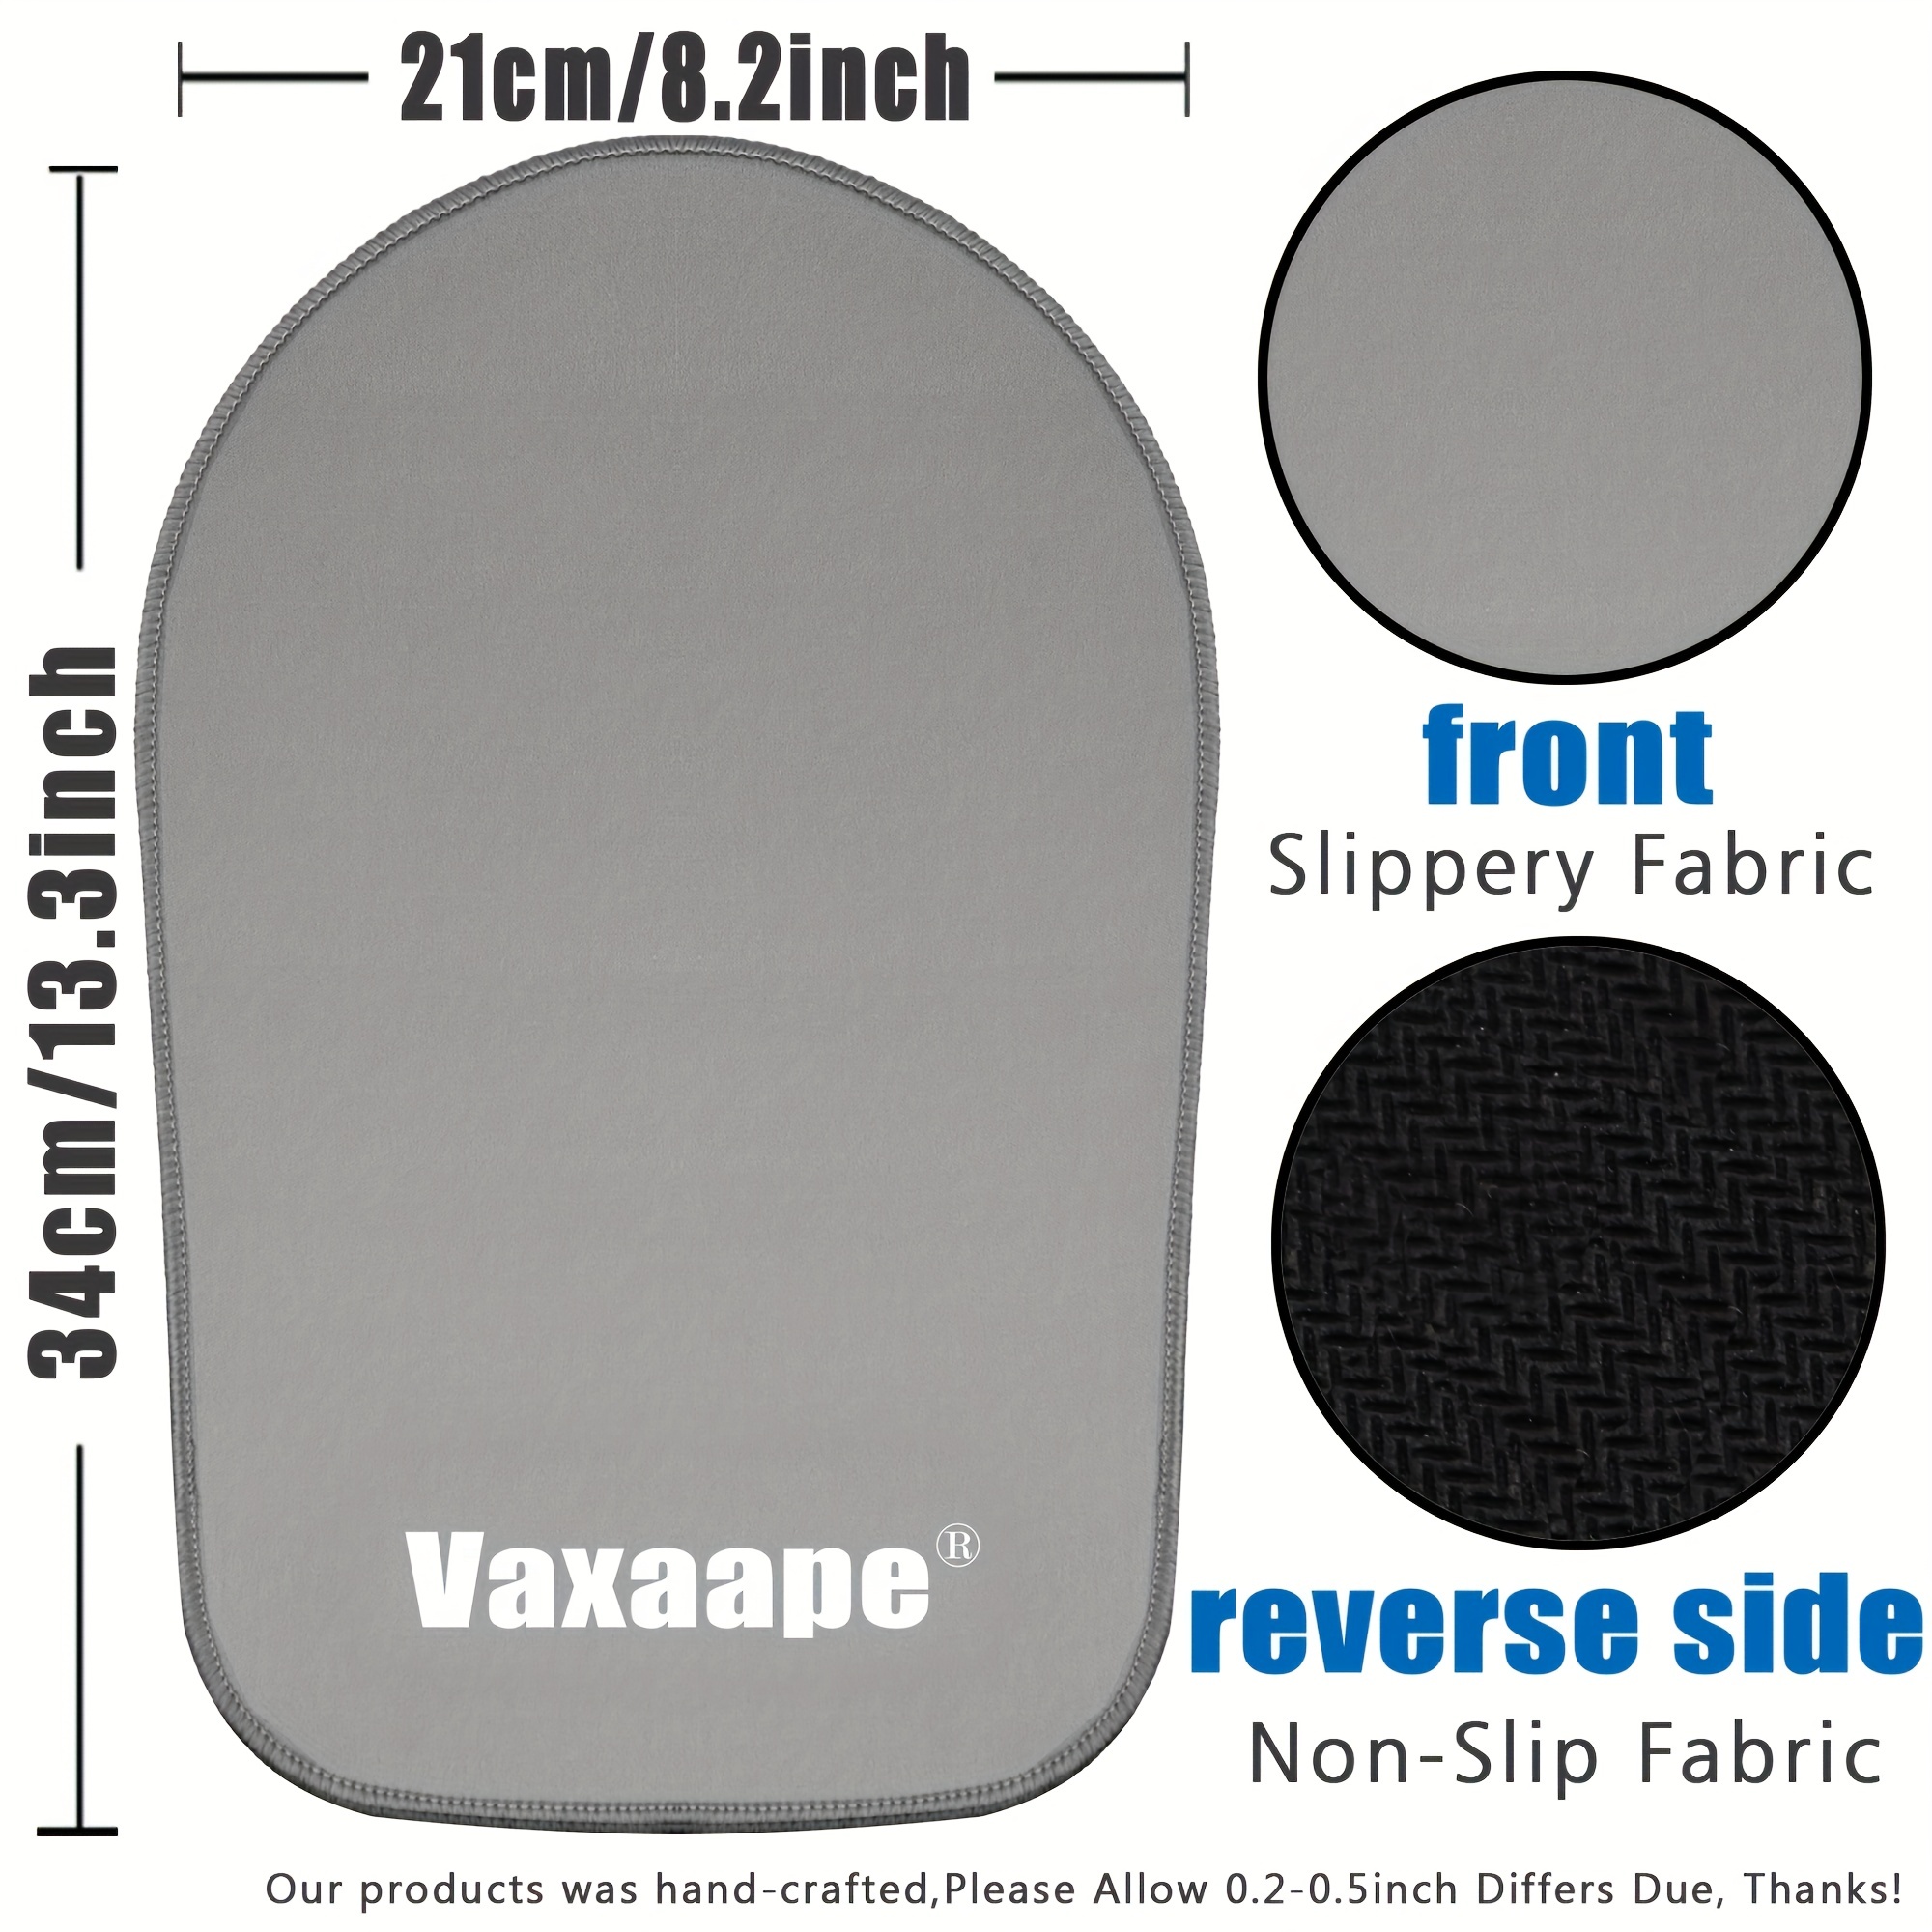 Sliding Mat for KitchenAid Mixer, Mover Slider Mat Pad for 5-8 qt Bowl-Lift Stand Mixer, Kitchen Appliance Slider Mat Compatible with Professional